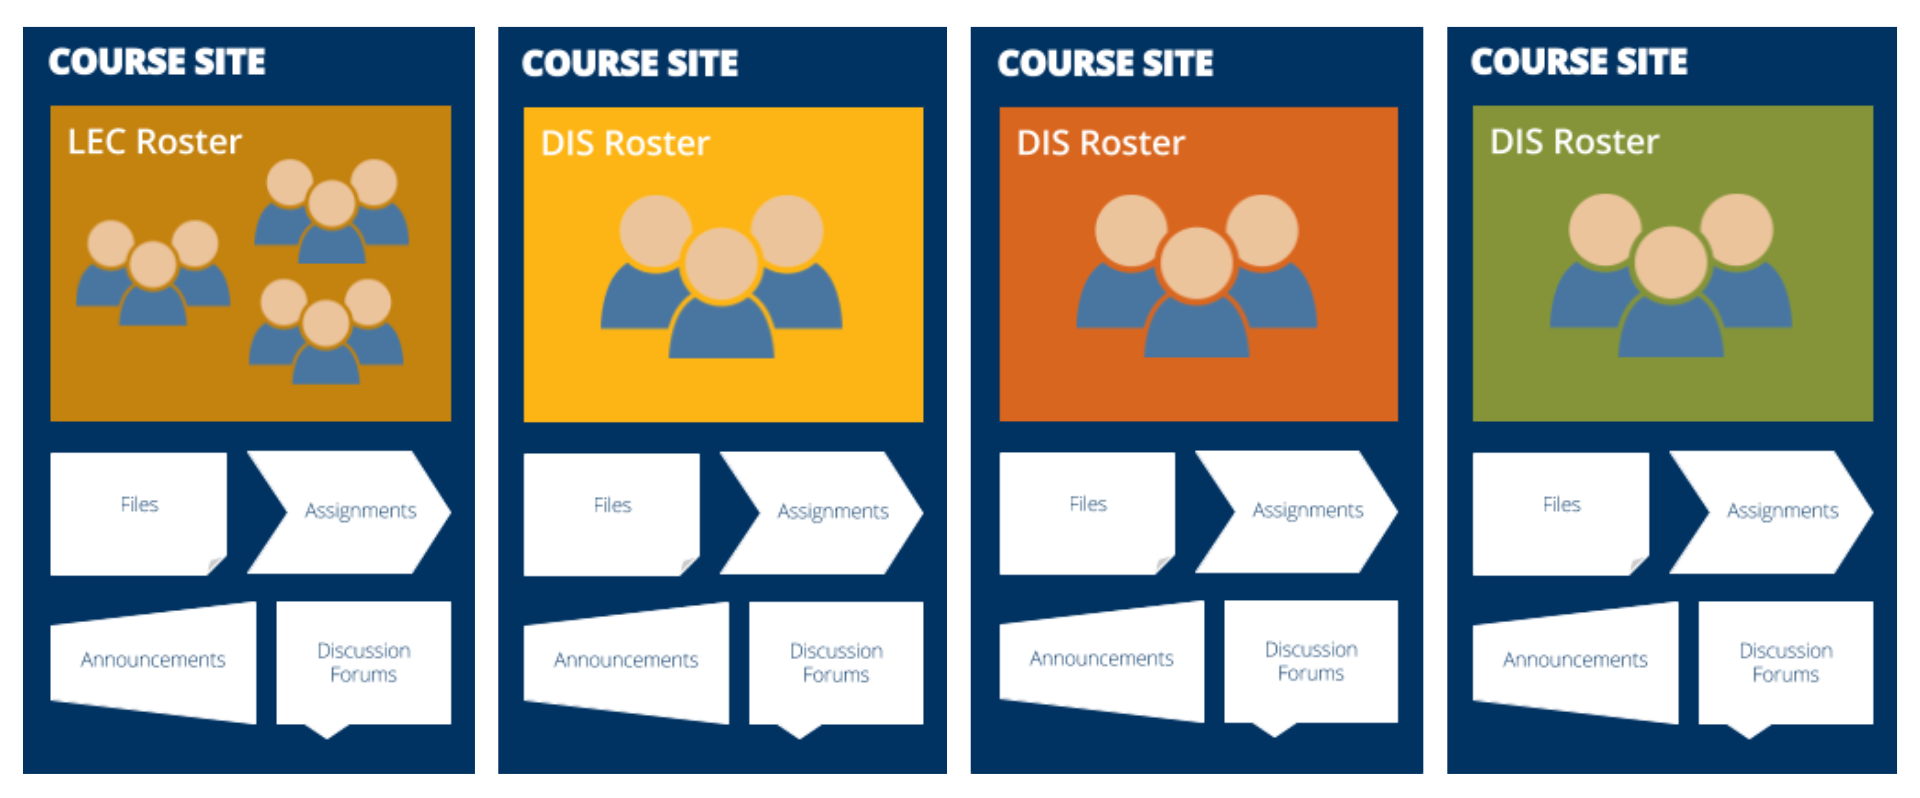 Information graphic depicting icons of LEC and DIS rosters in separate courses with other icons representing all course elements and activities